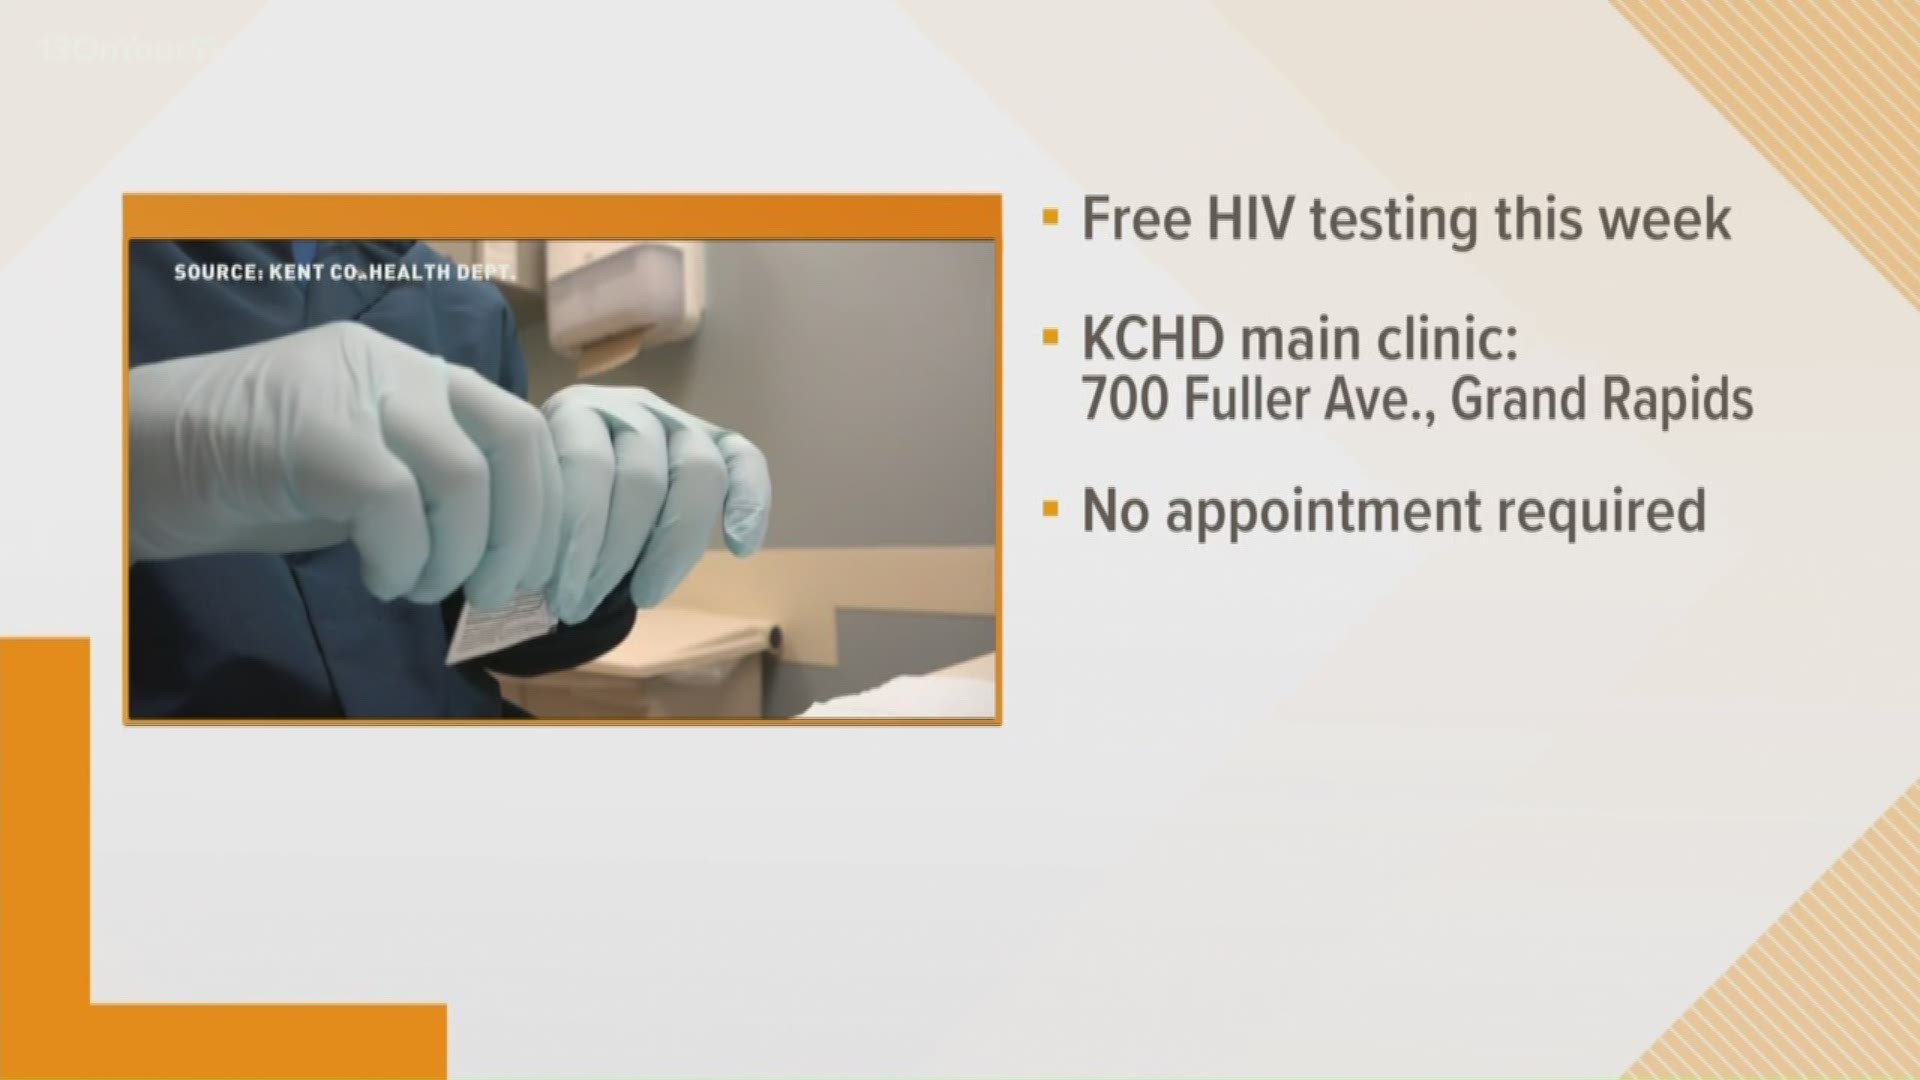 Thursday, June 27 is National HIV Testing Day, prompting state and local health officials to urge Michiganders to get tested. In Michigan, nearly 19,000 people are living with HIV, and 14% are not aware of their positive status. The Kent County Health Dept. is offering free, walk-in HIV testing today and tomorrow.